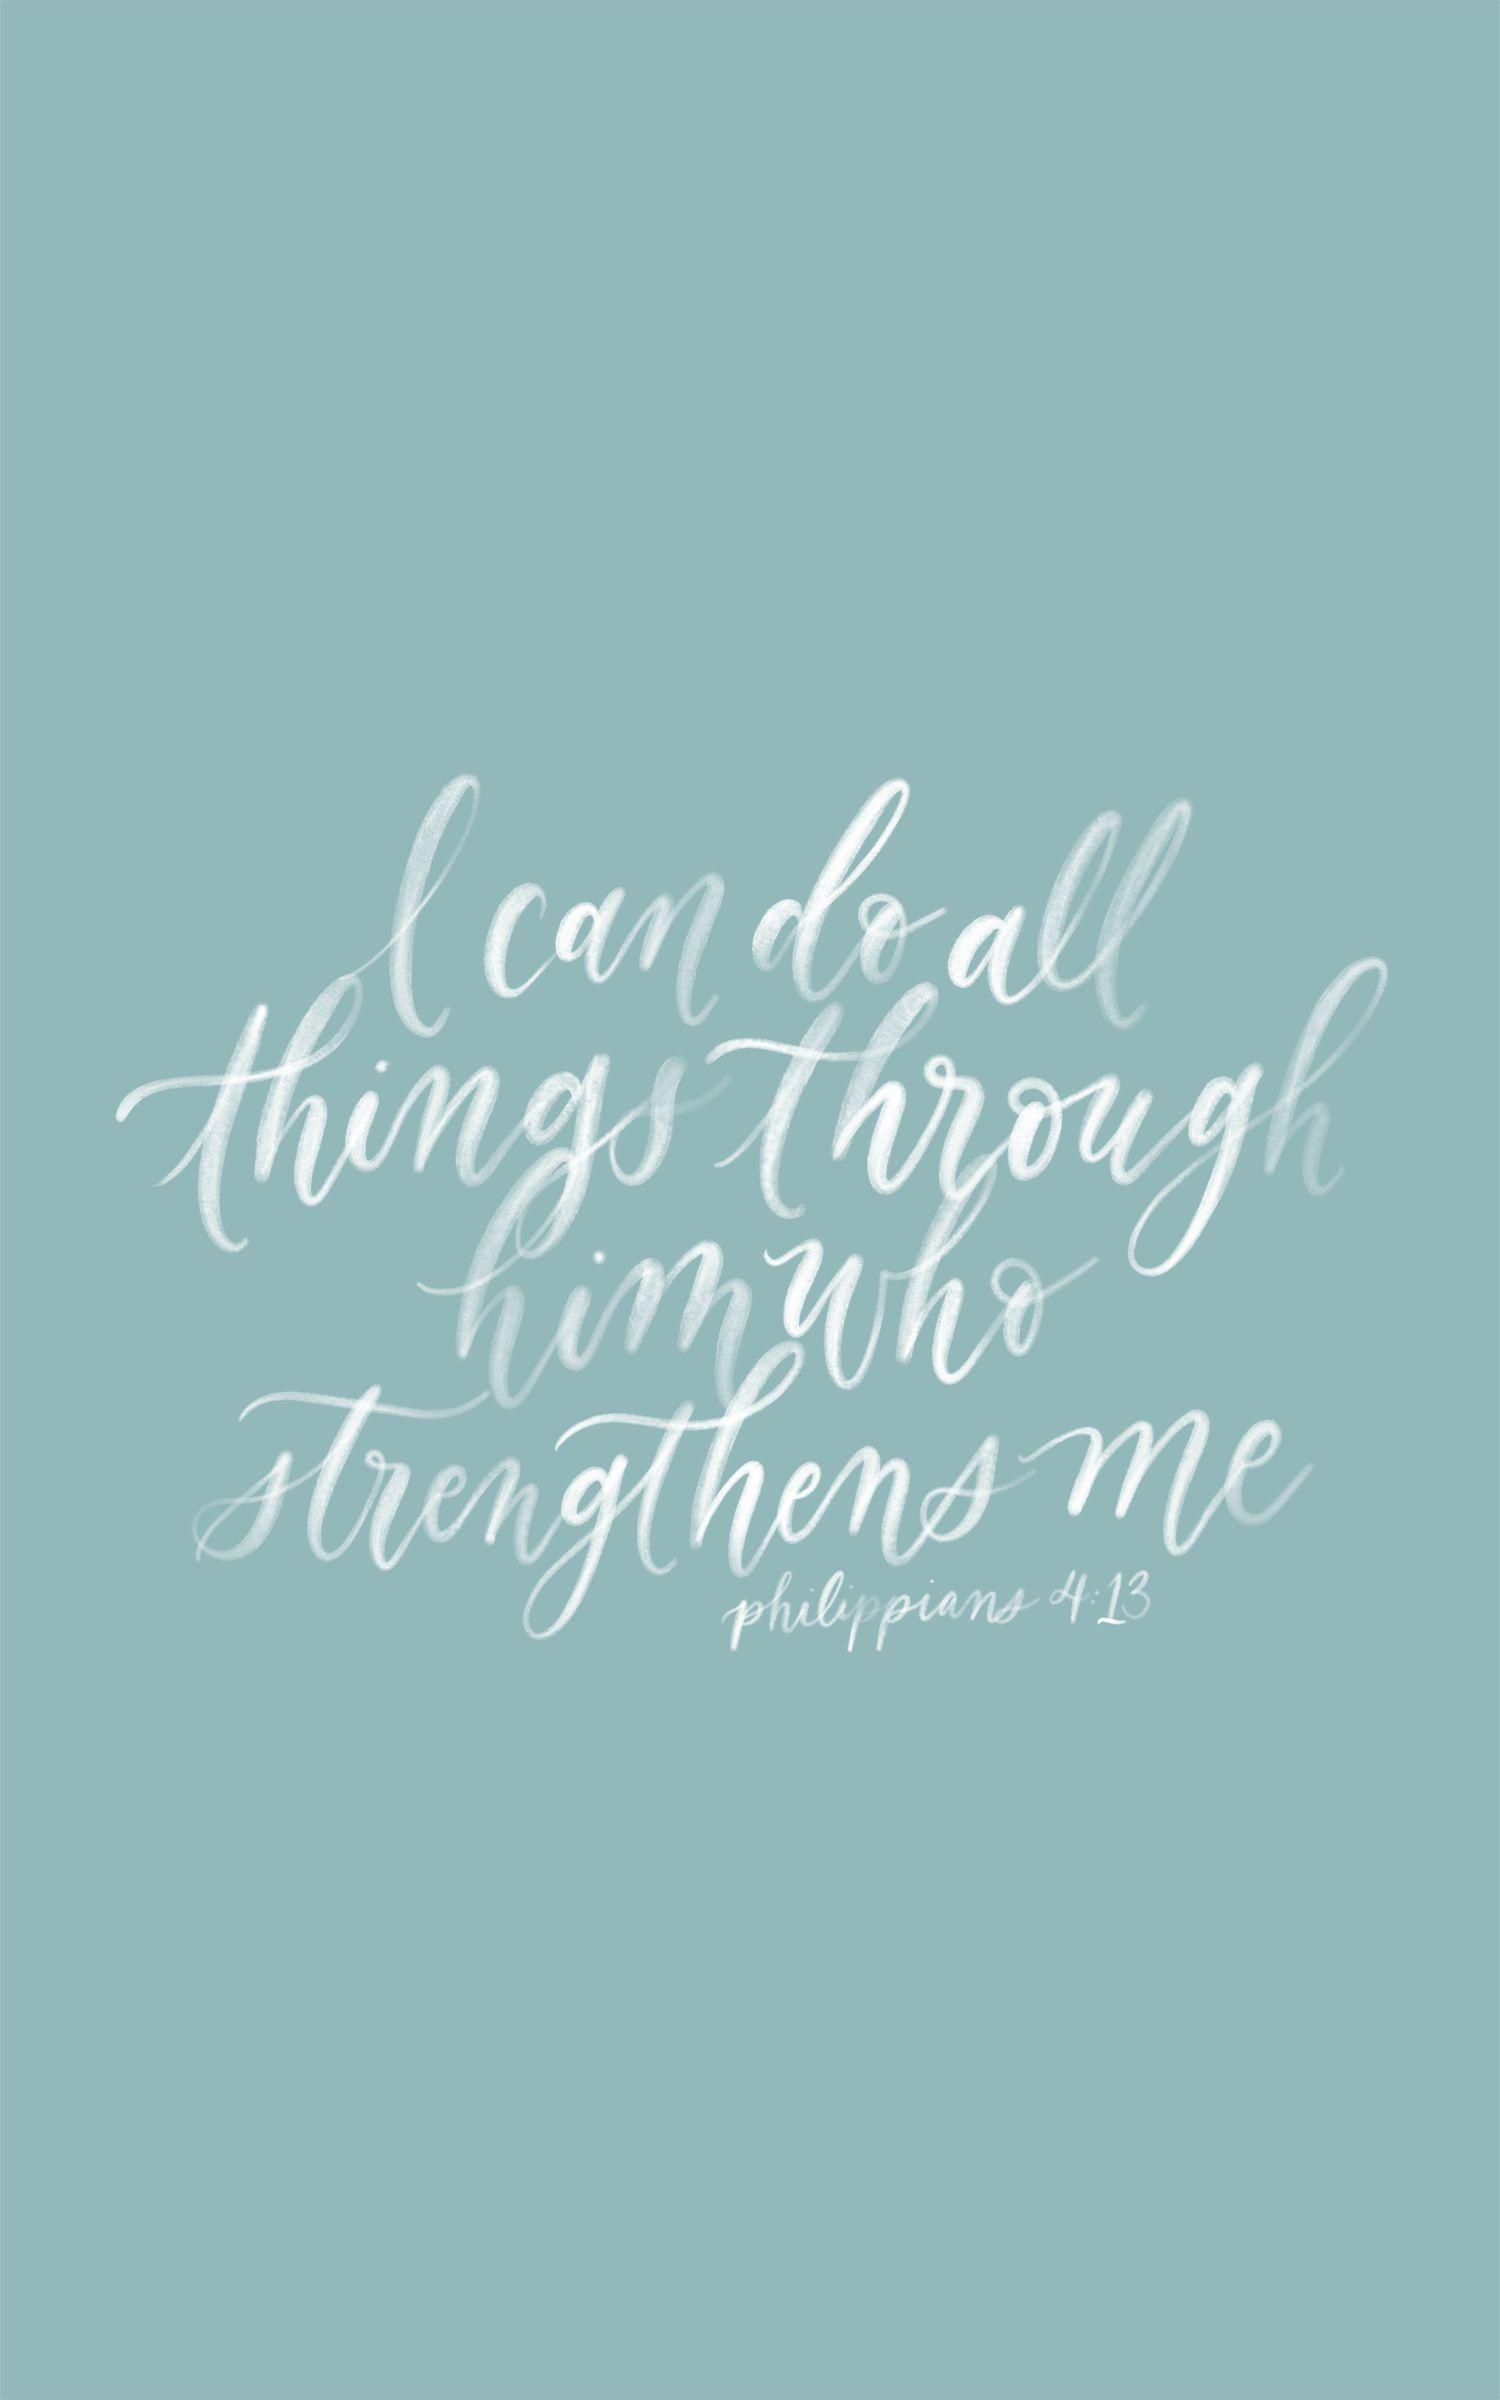 Bible Verse Scripture Christian Wall Decal I Can Do All Things Through  Christ Who Strengthens Me Philippians 413 Wall Sticker for Livingroo  Prayer Inspirational Quote Wallpaper Mural for Bedroom  Amazonin Home